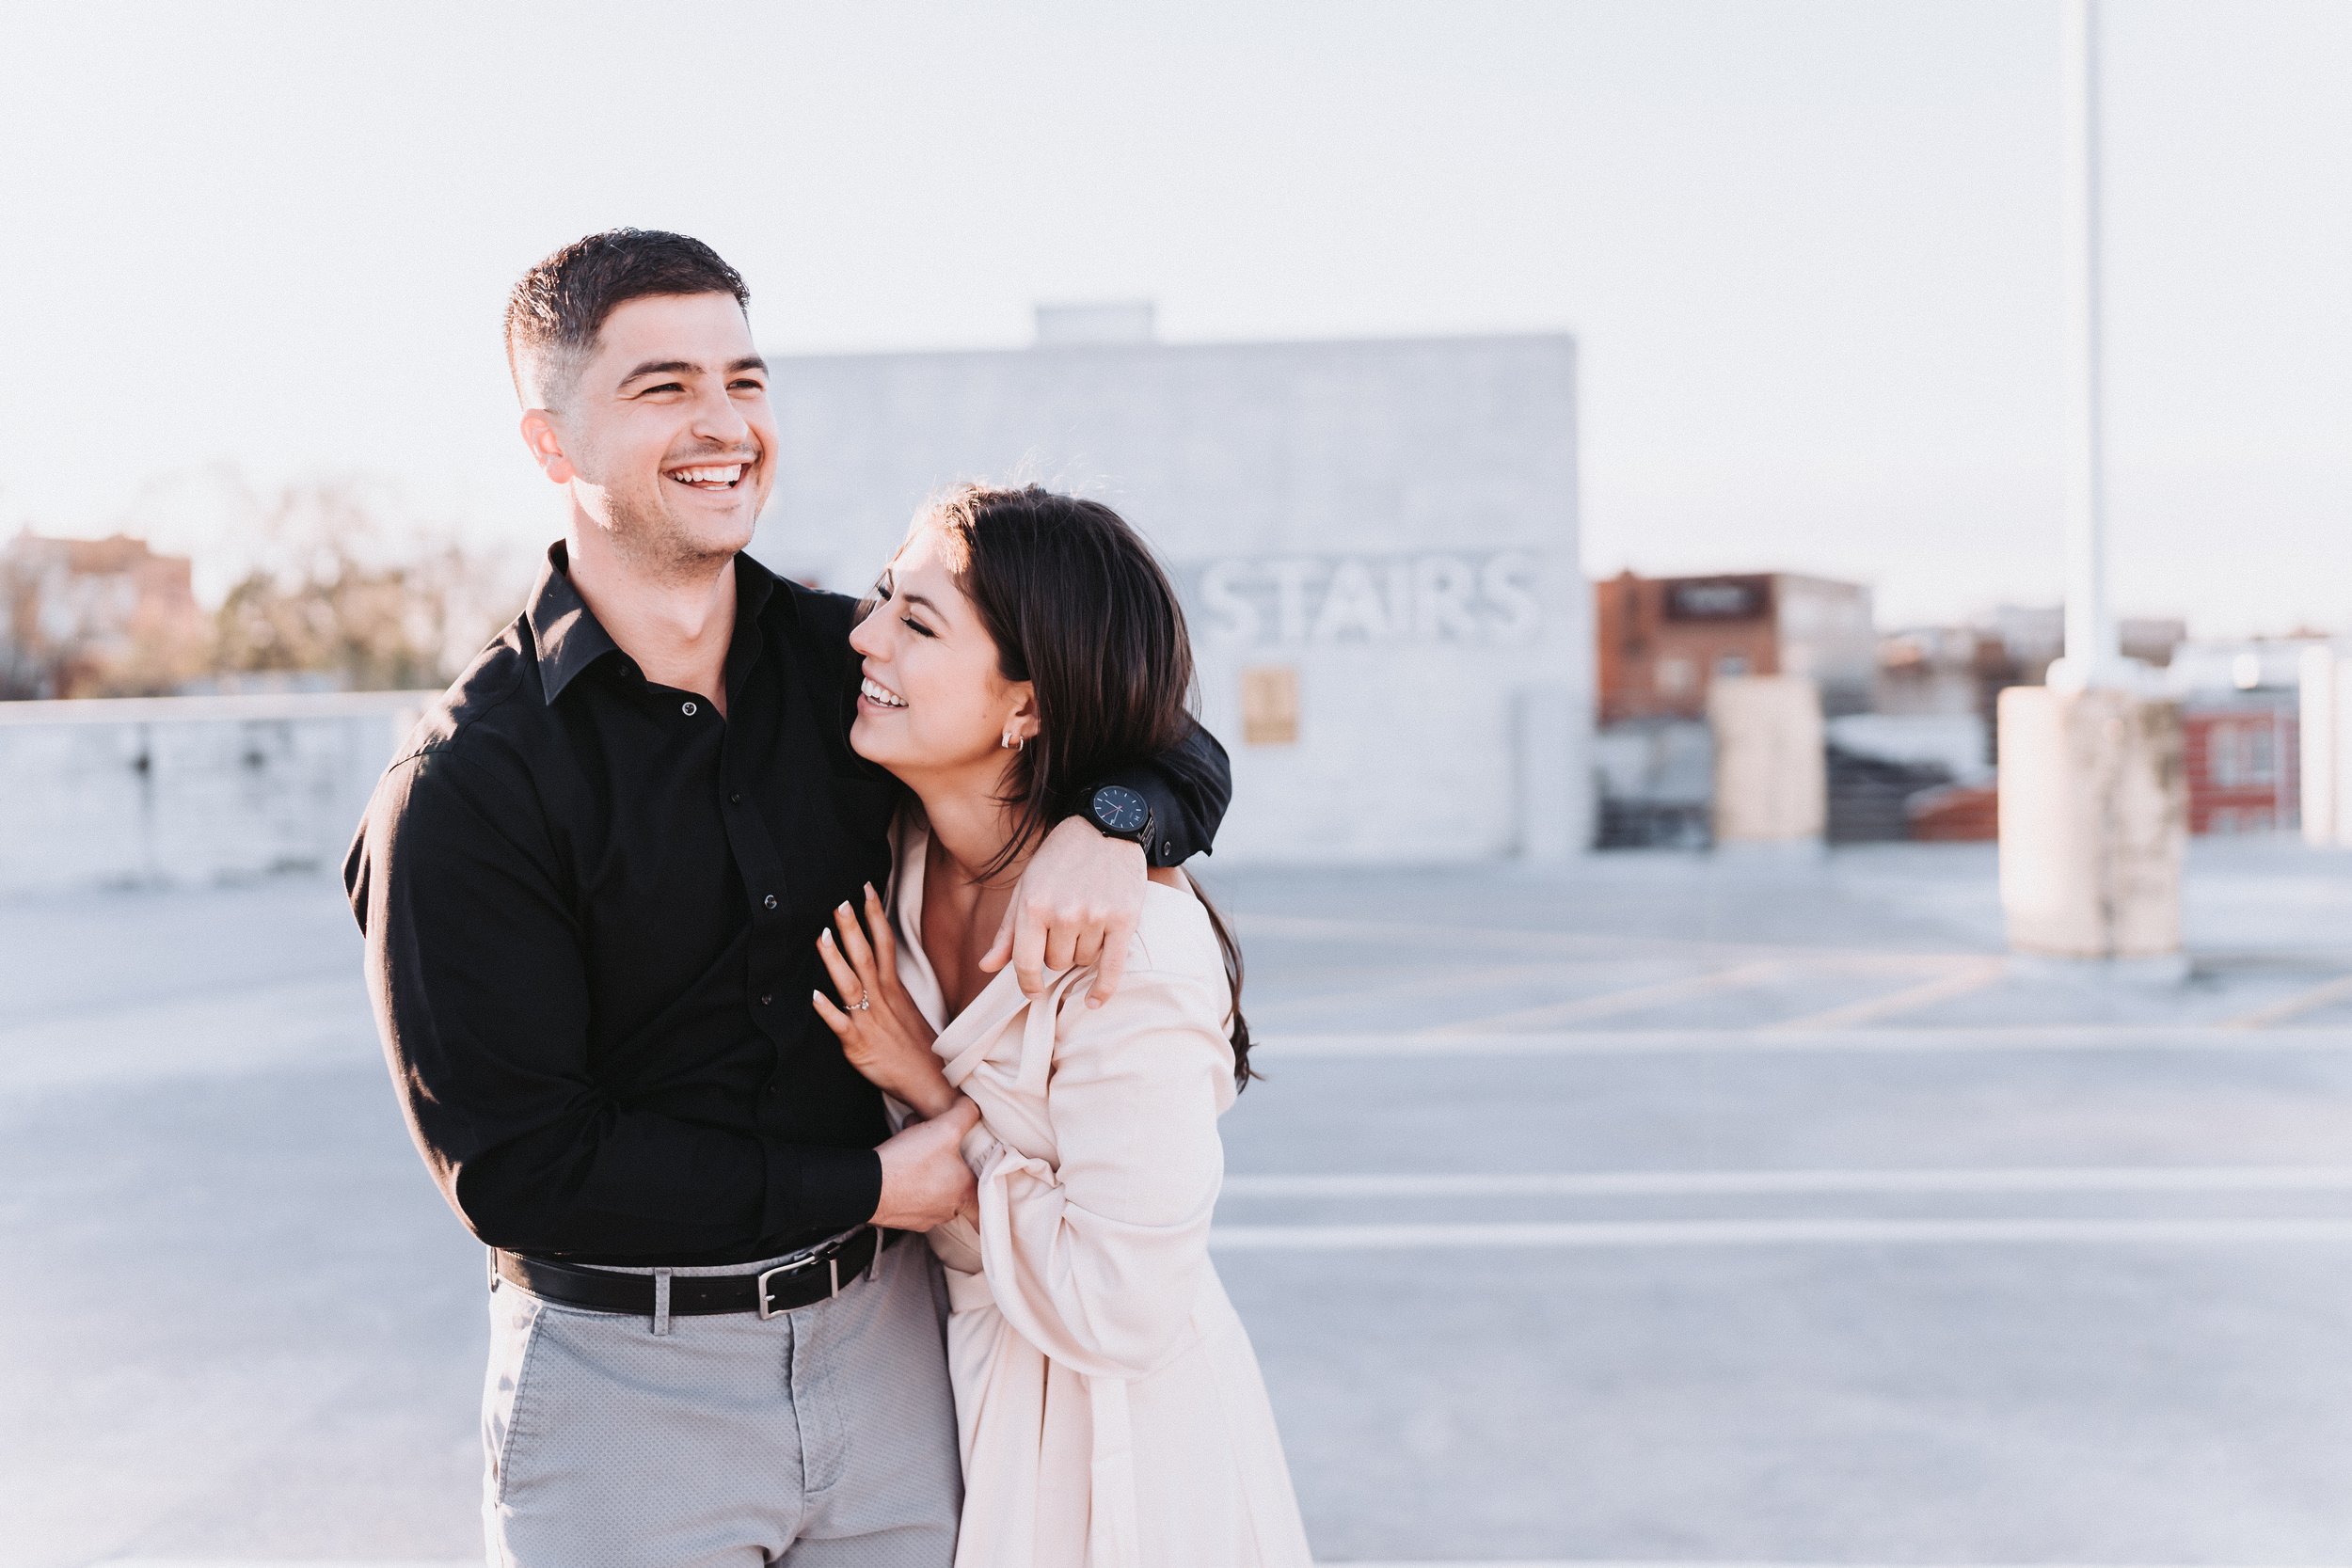 Engagement Session at the University of Georgia